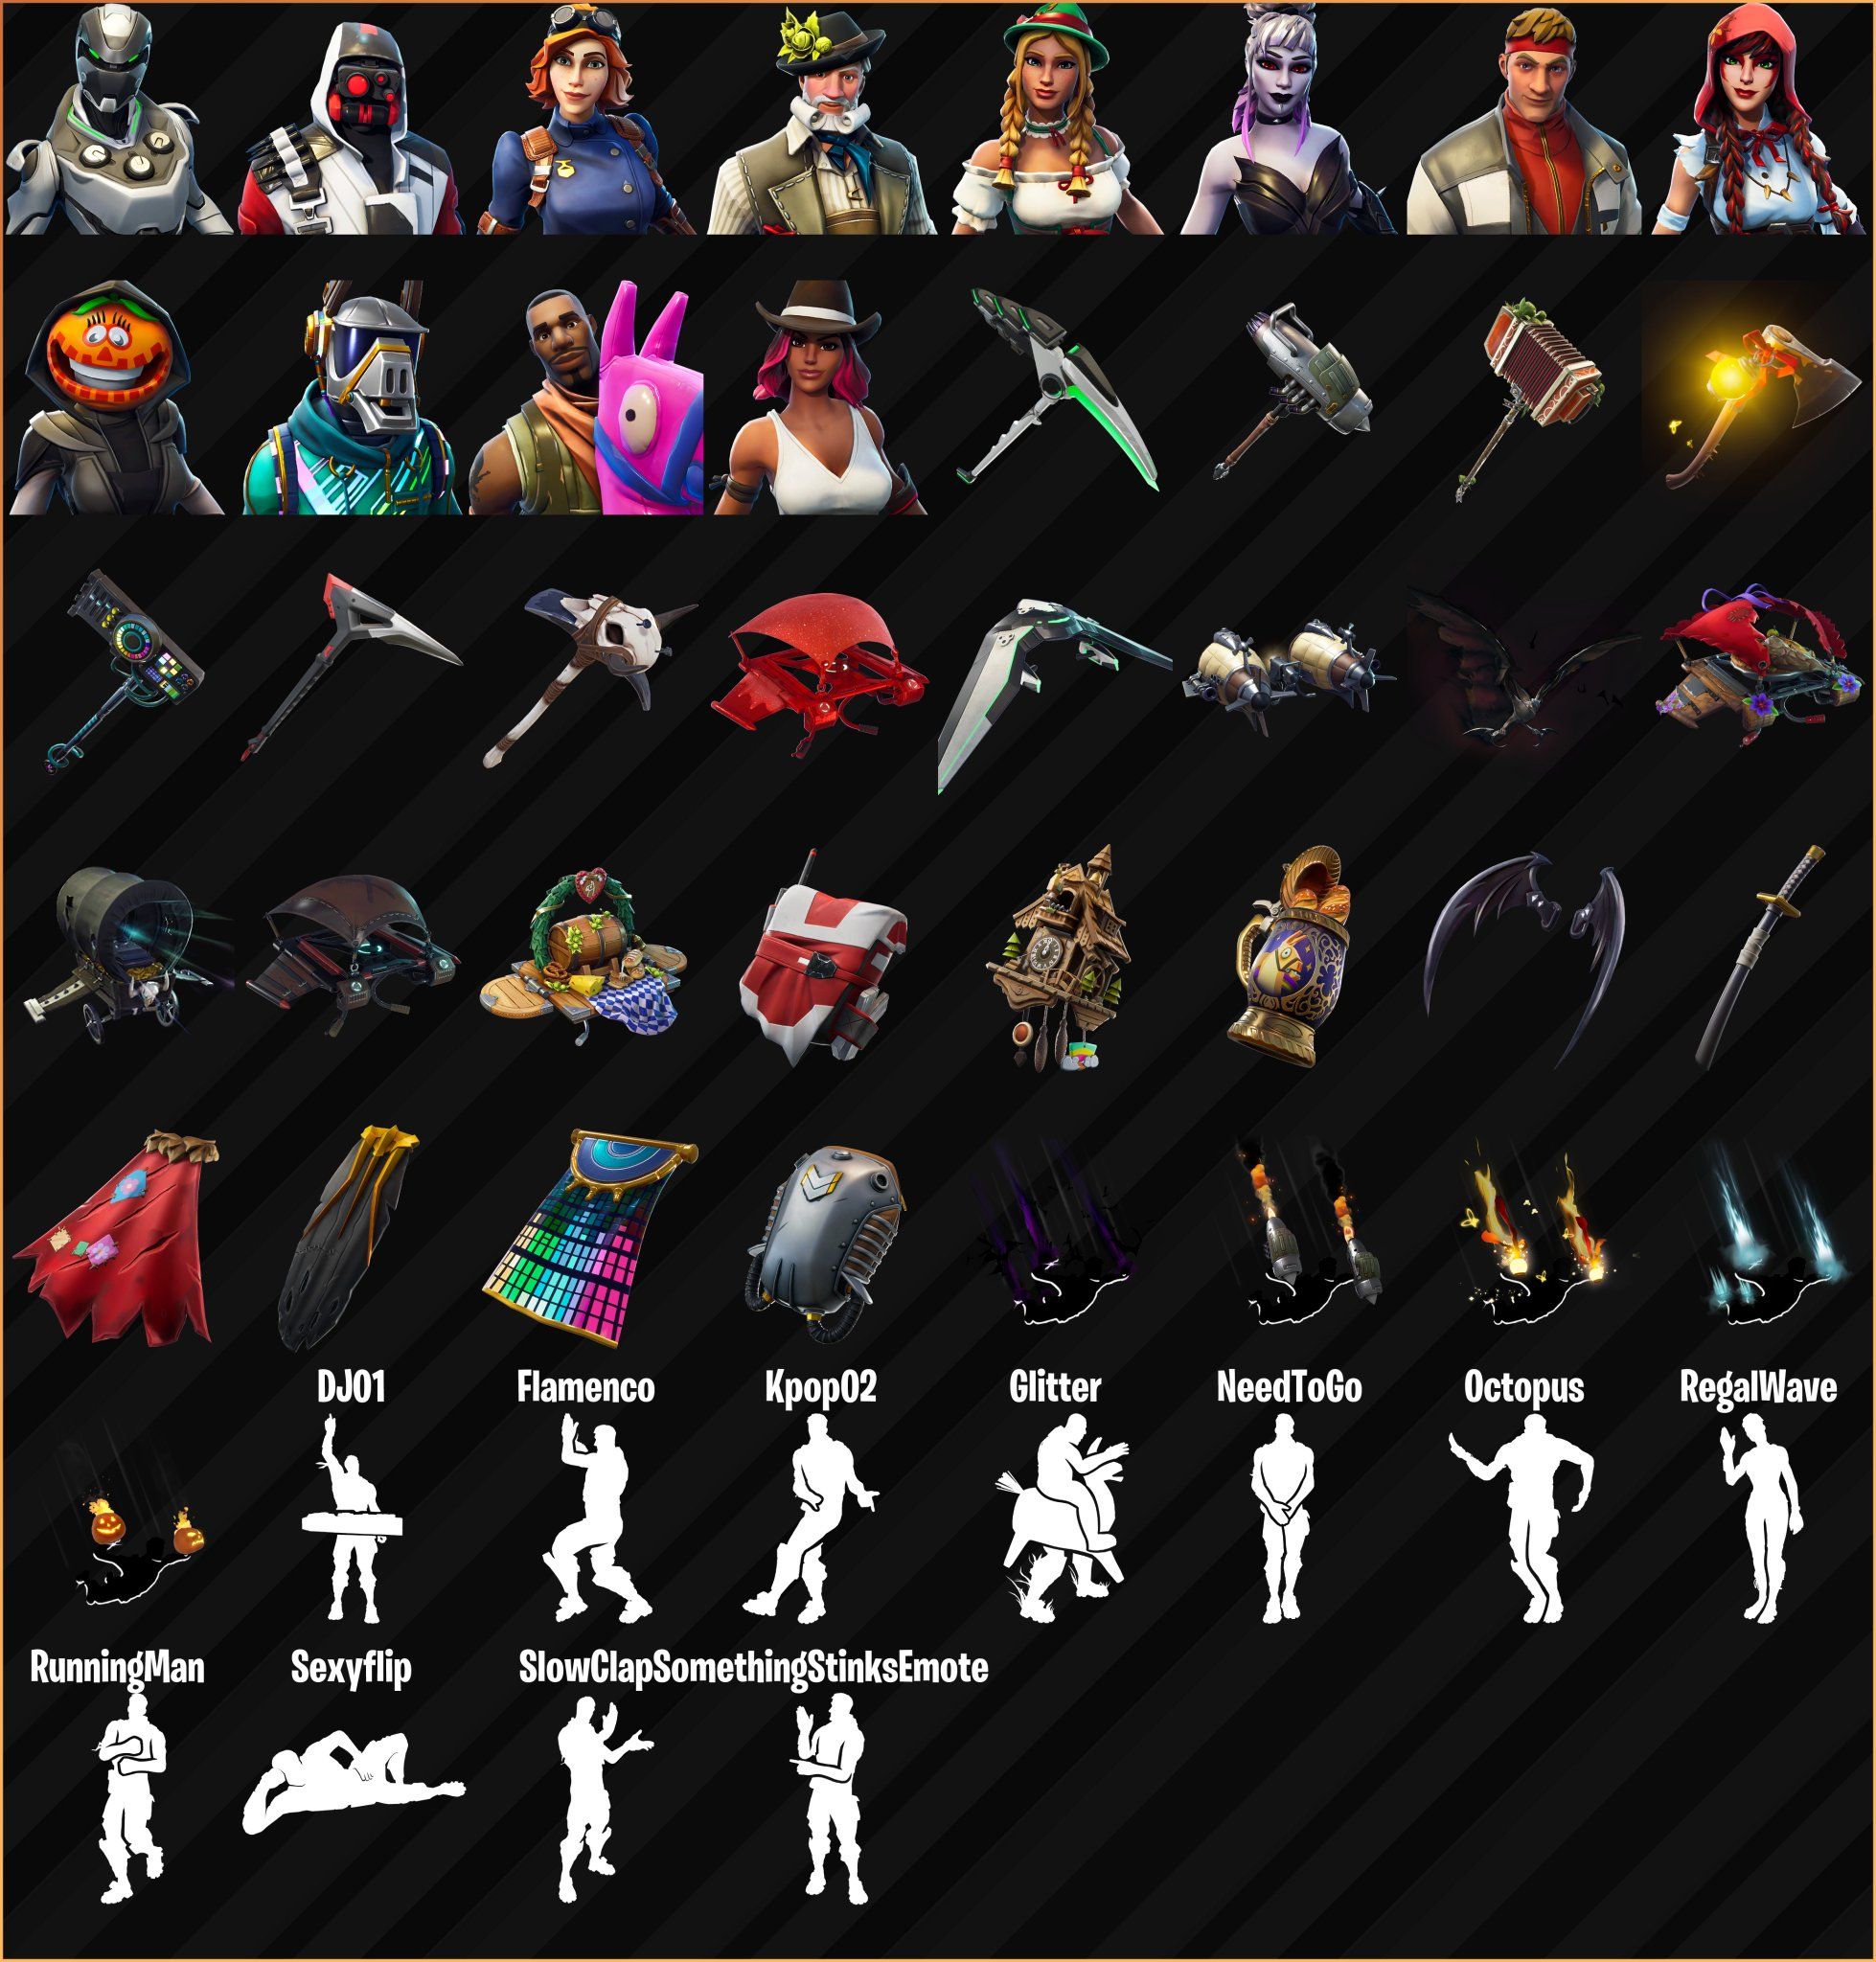 Upcoming cosmetics found in v6.0 patch files